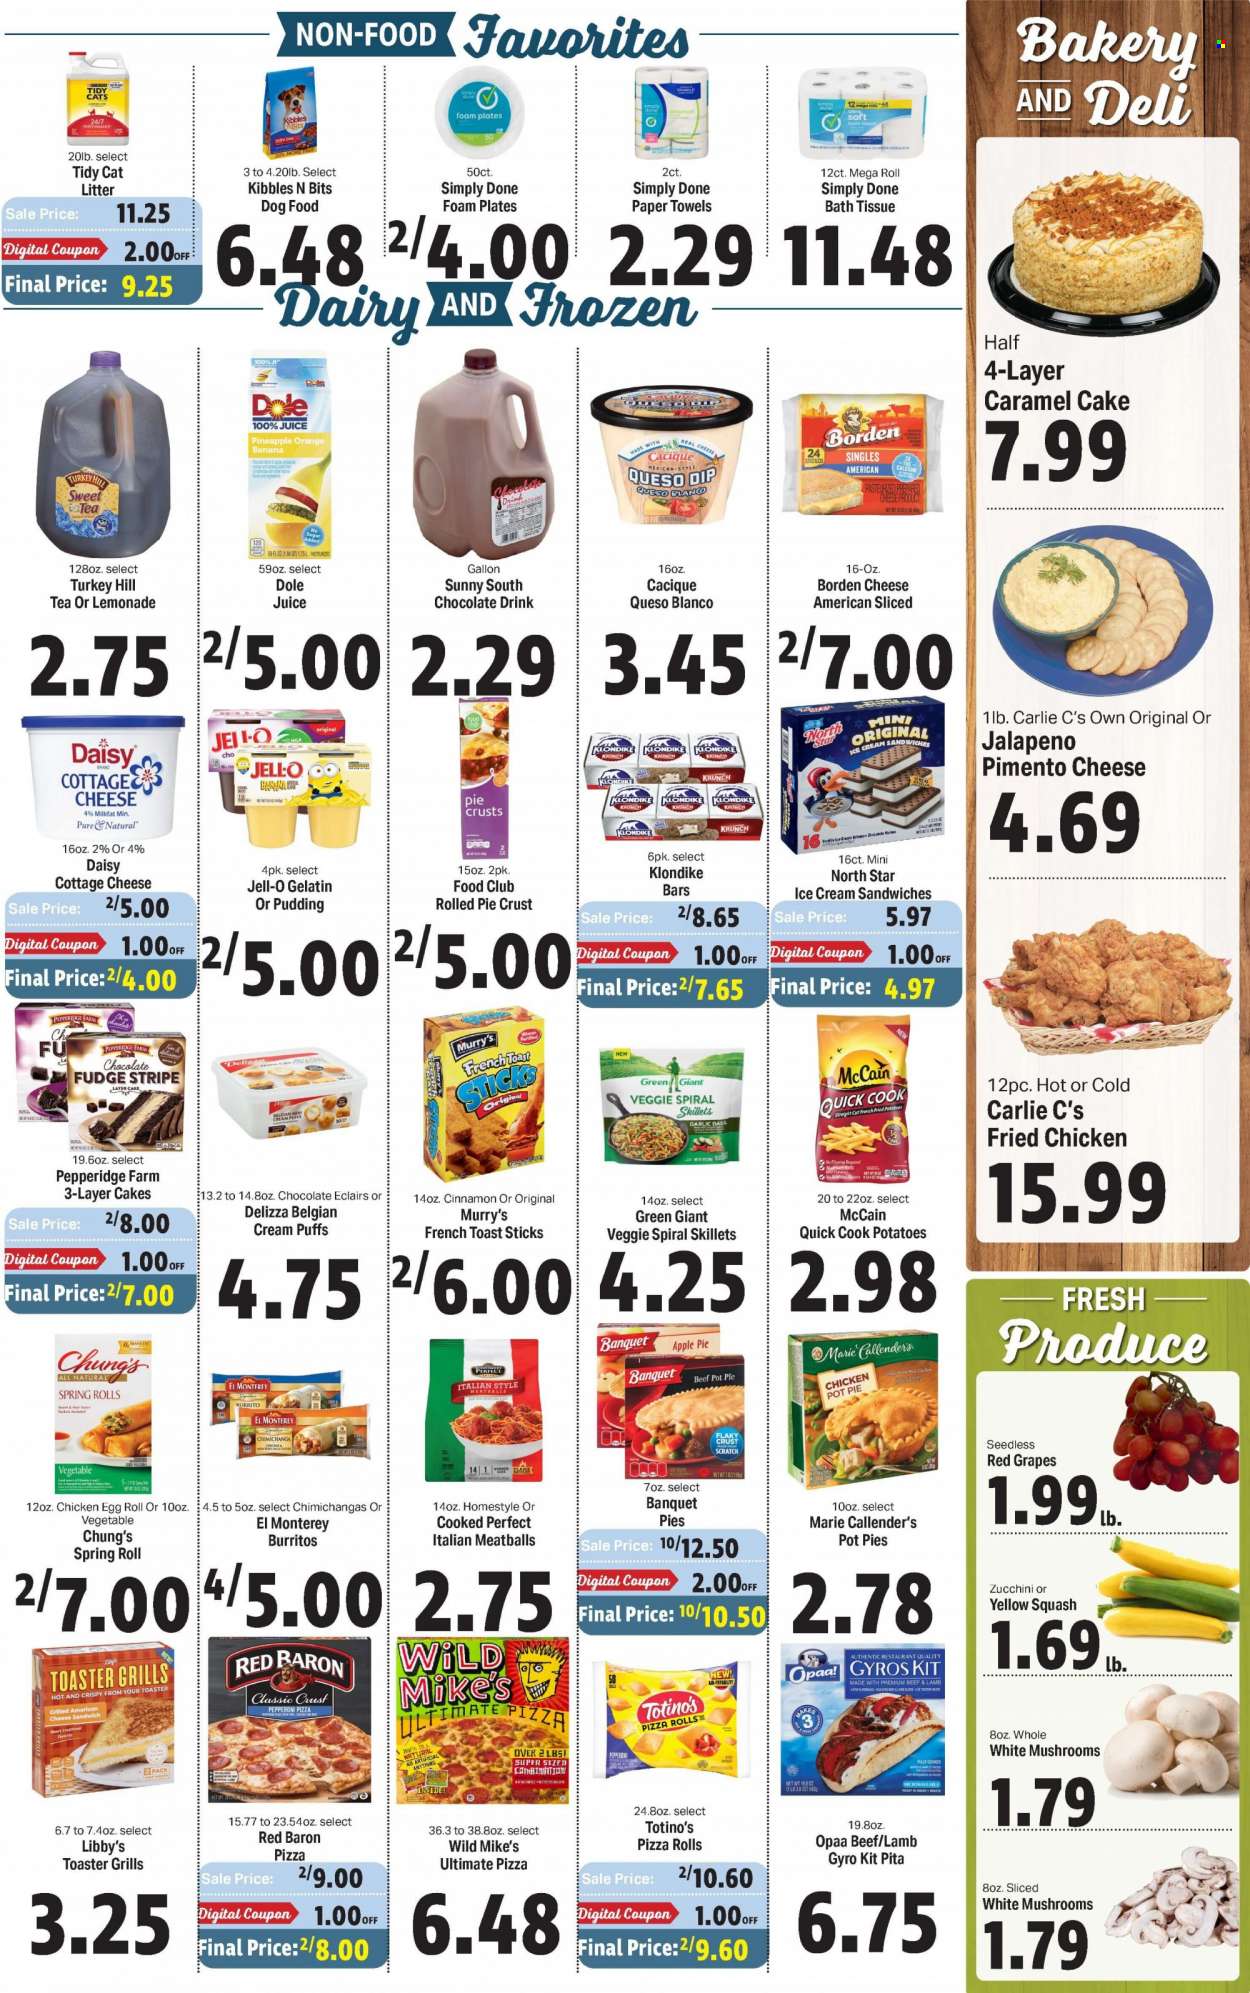 thumbnail - Carlie C's Flyer - 11/30/2022 - 12/06/2022 - Sales products - pita, pizza rolls, apple pie, pot pie, puffs, cream puffs, garlic, zucchini, potatoes, Dole, yellow squash, grapes, pineapple, oranges, pizza, meatballs, egg rolls, fried chicken, spring rolls, burrito, Marie Callender's, pepperoni, american cheese, cottage cheese, pudding, eggs, mayonnaise, dip, ice cream, ice cream sandwich, McCain, Red Baron, fudge, pie crust, Jell-O, cinnamon, caramel, lemonade, juice, chocolate drink, tea, animal food, cat litter, dog food, calcium. Page 3.